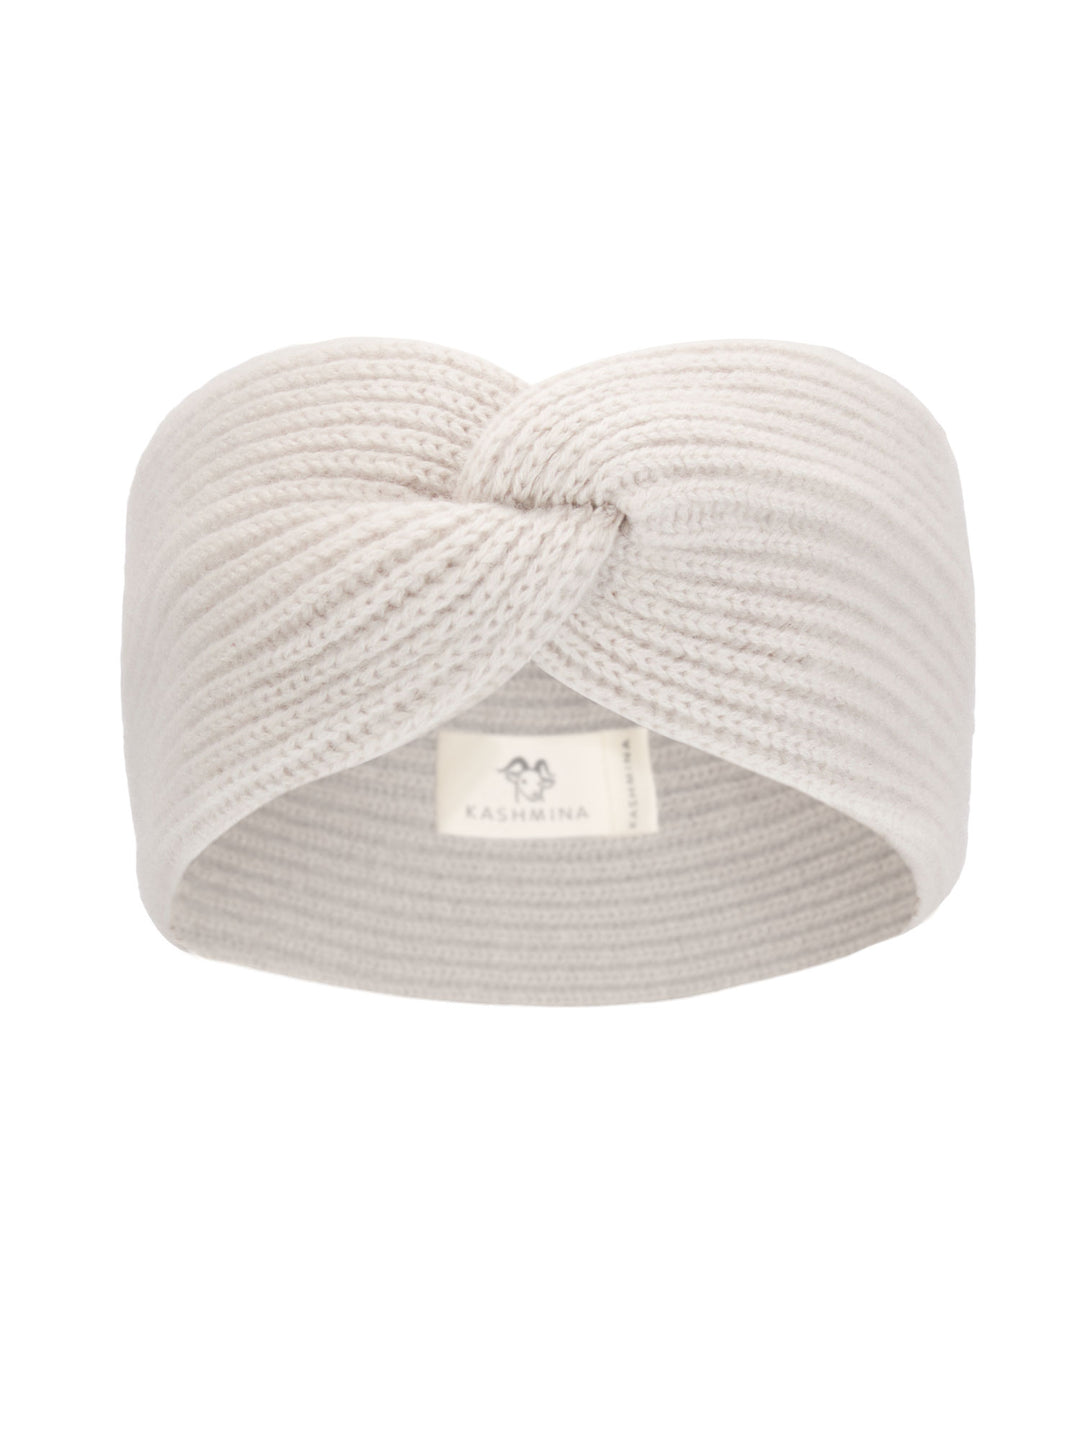 Cashmere head band Freya in 100% cashmere. Color: Cold Creme. Scandinavian design from Kashmina